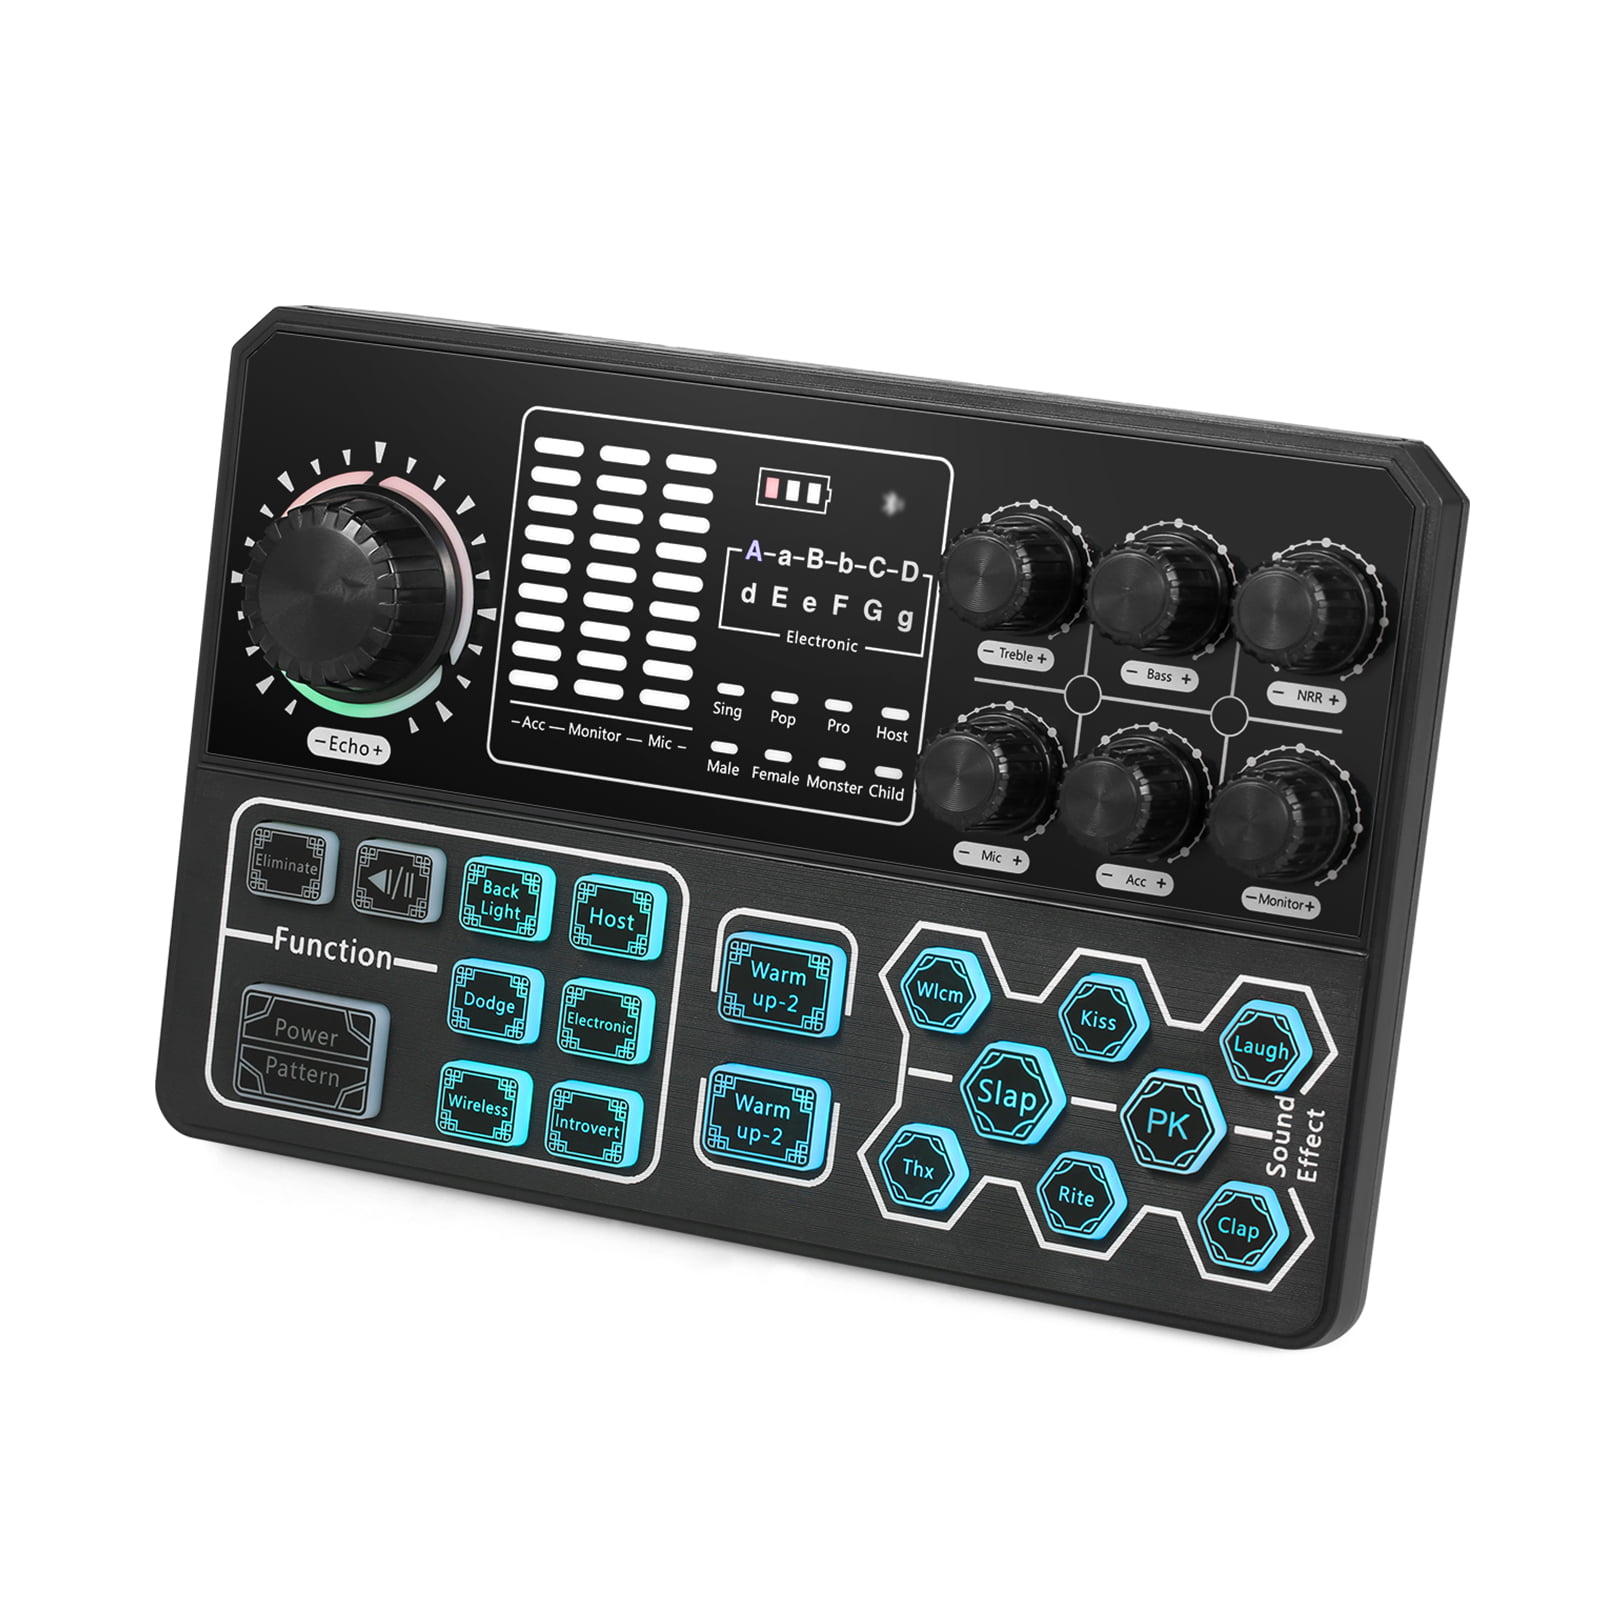 Live Sound Card External Voice Mixer BT Sound Board with Multiple Sound Effects for Smartphone Computer Live Streaming Broadcast Gaming | Walmart Canada